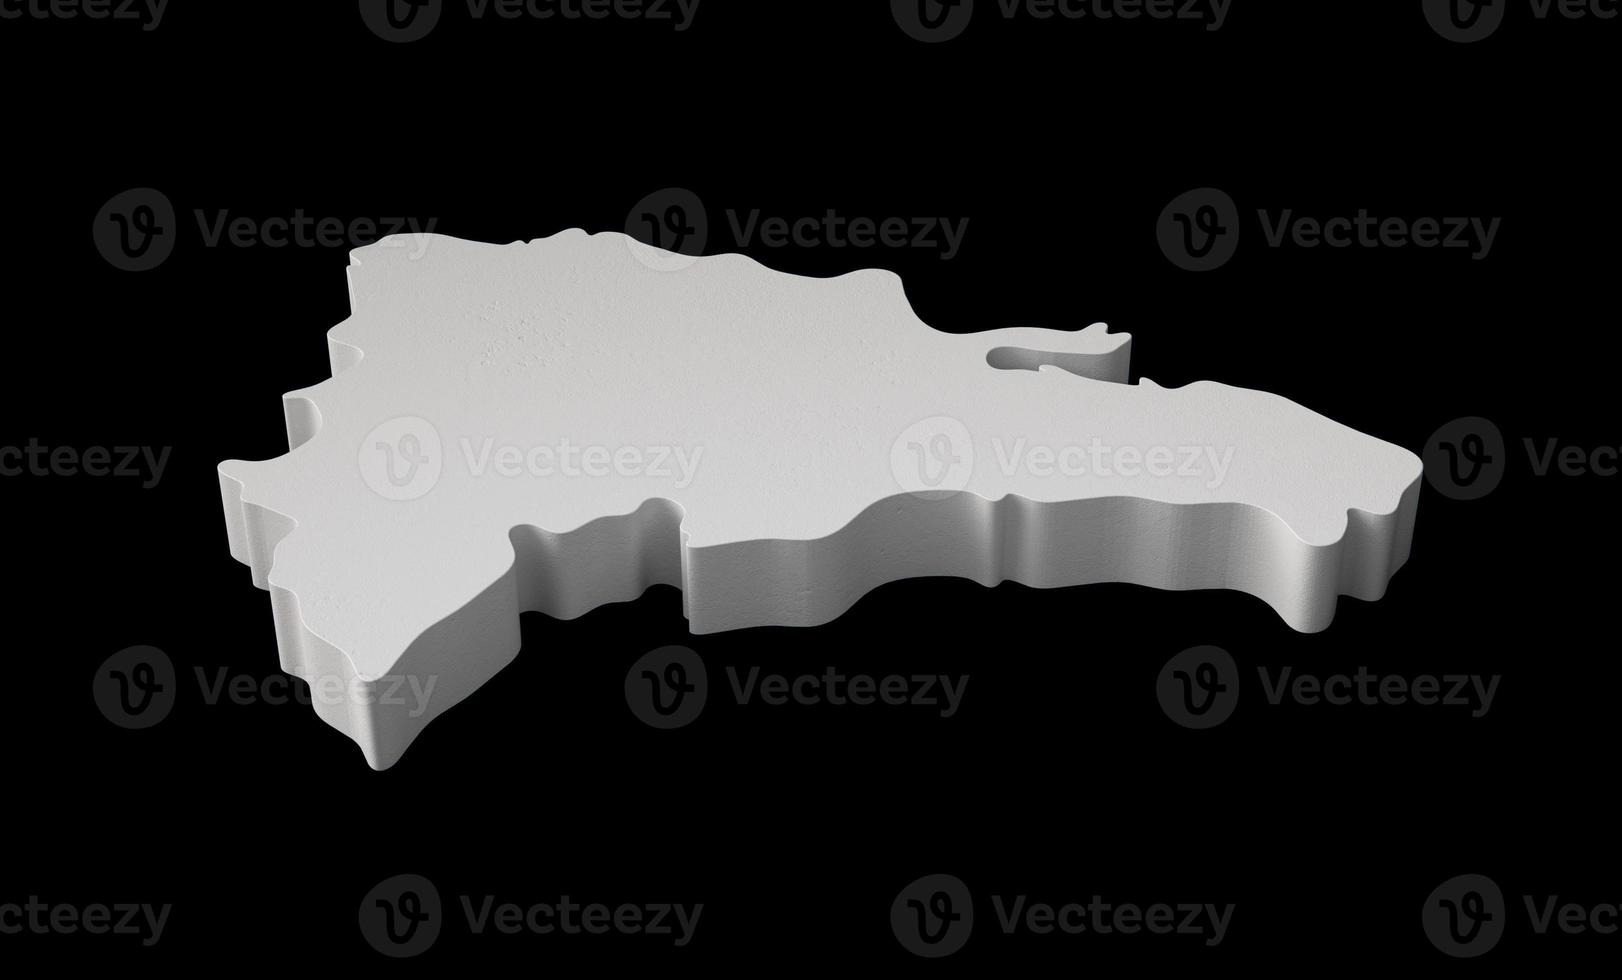 Dominican Republic 3D map Geography Cartography and topology black and white 3D illustration photo